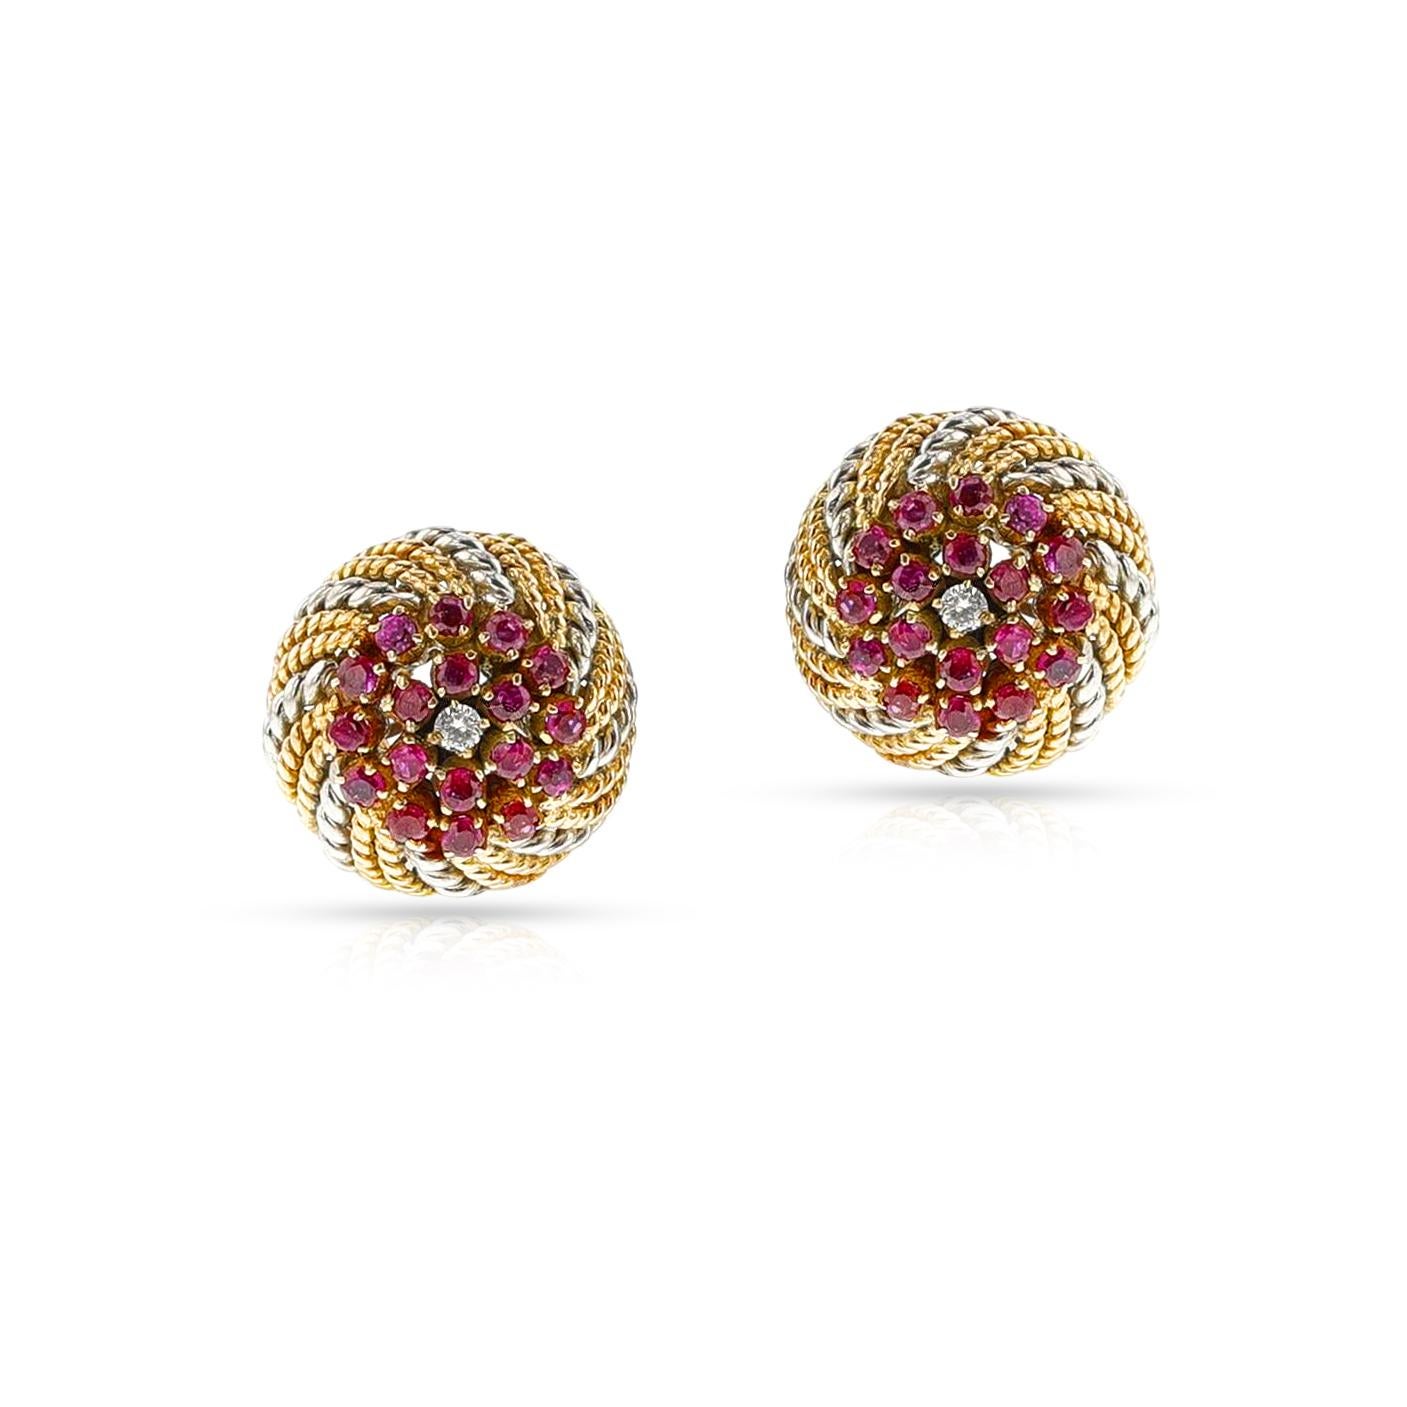 A pair of Rope-Work Yellow and White Gold Ruby and Diamond Earrings made in 14k Yellow Gold. The total weight of the earring is 13.80 grams. 

 

1356-AAEFRT